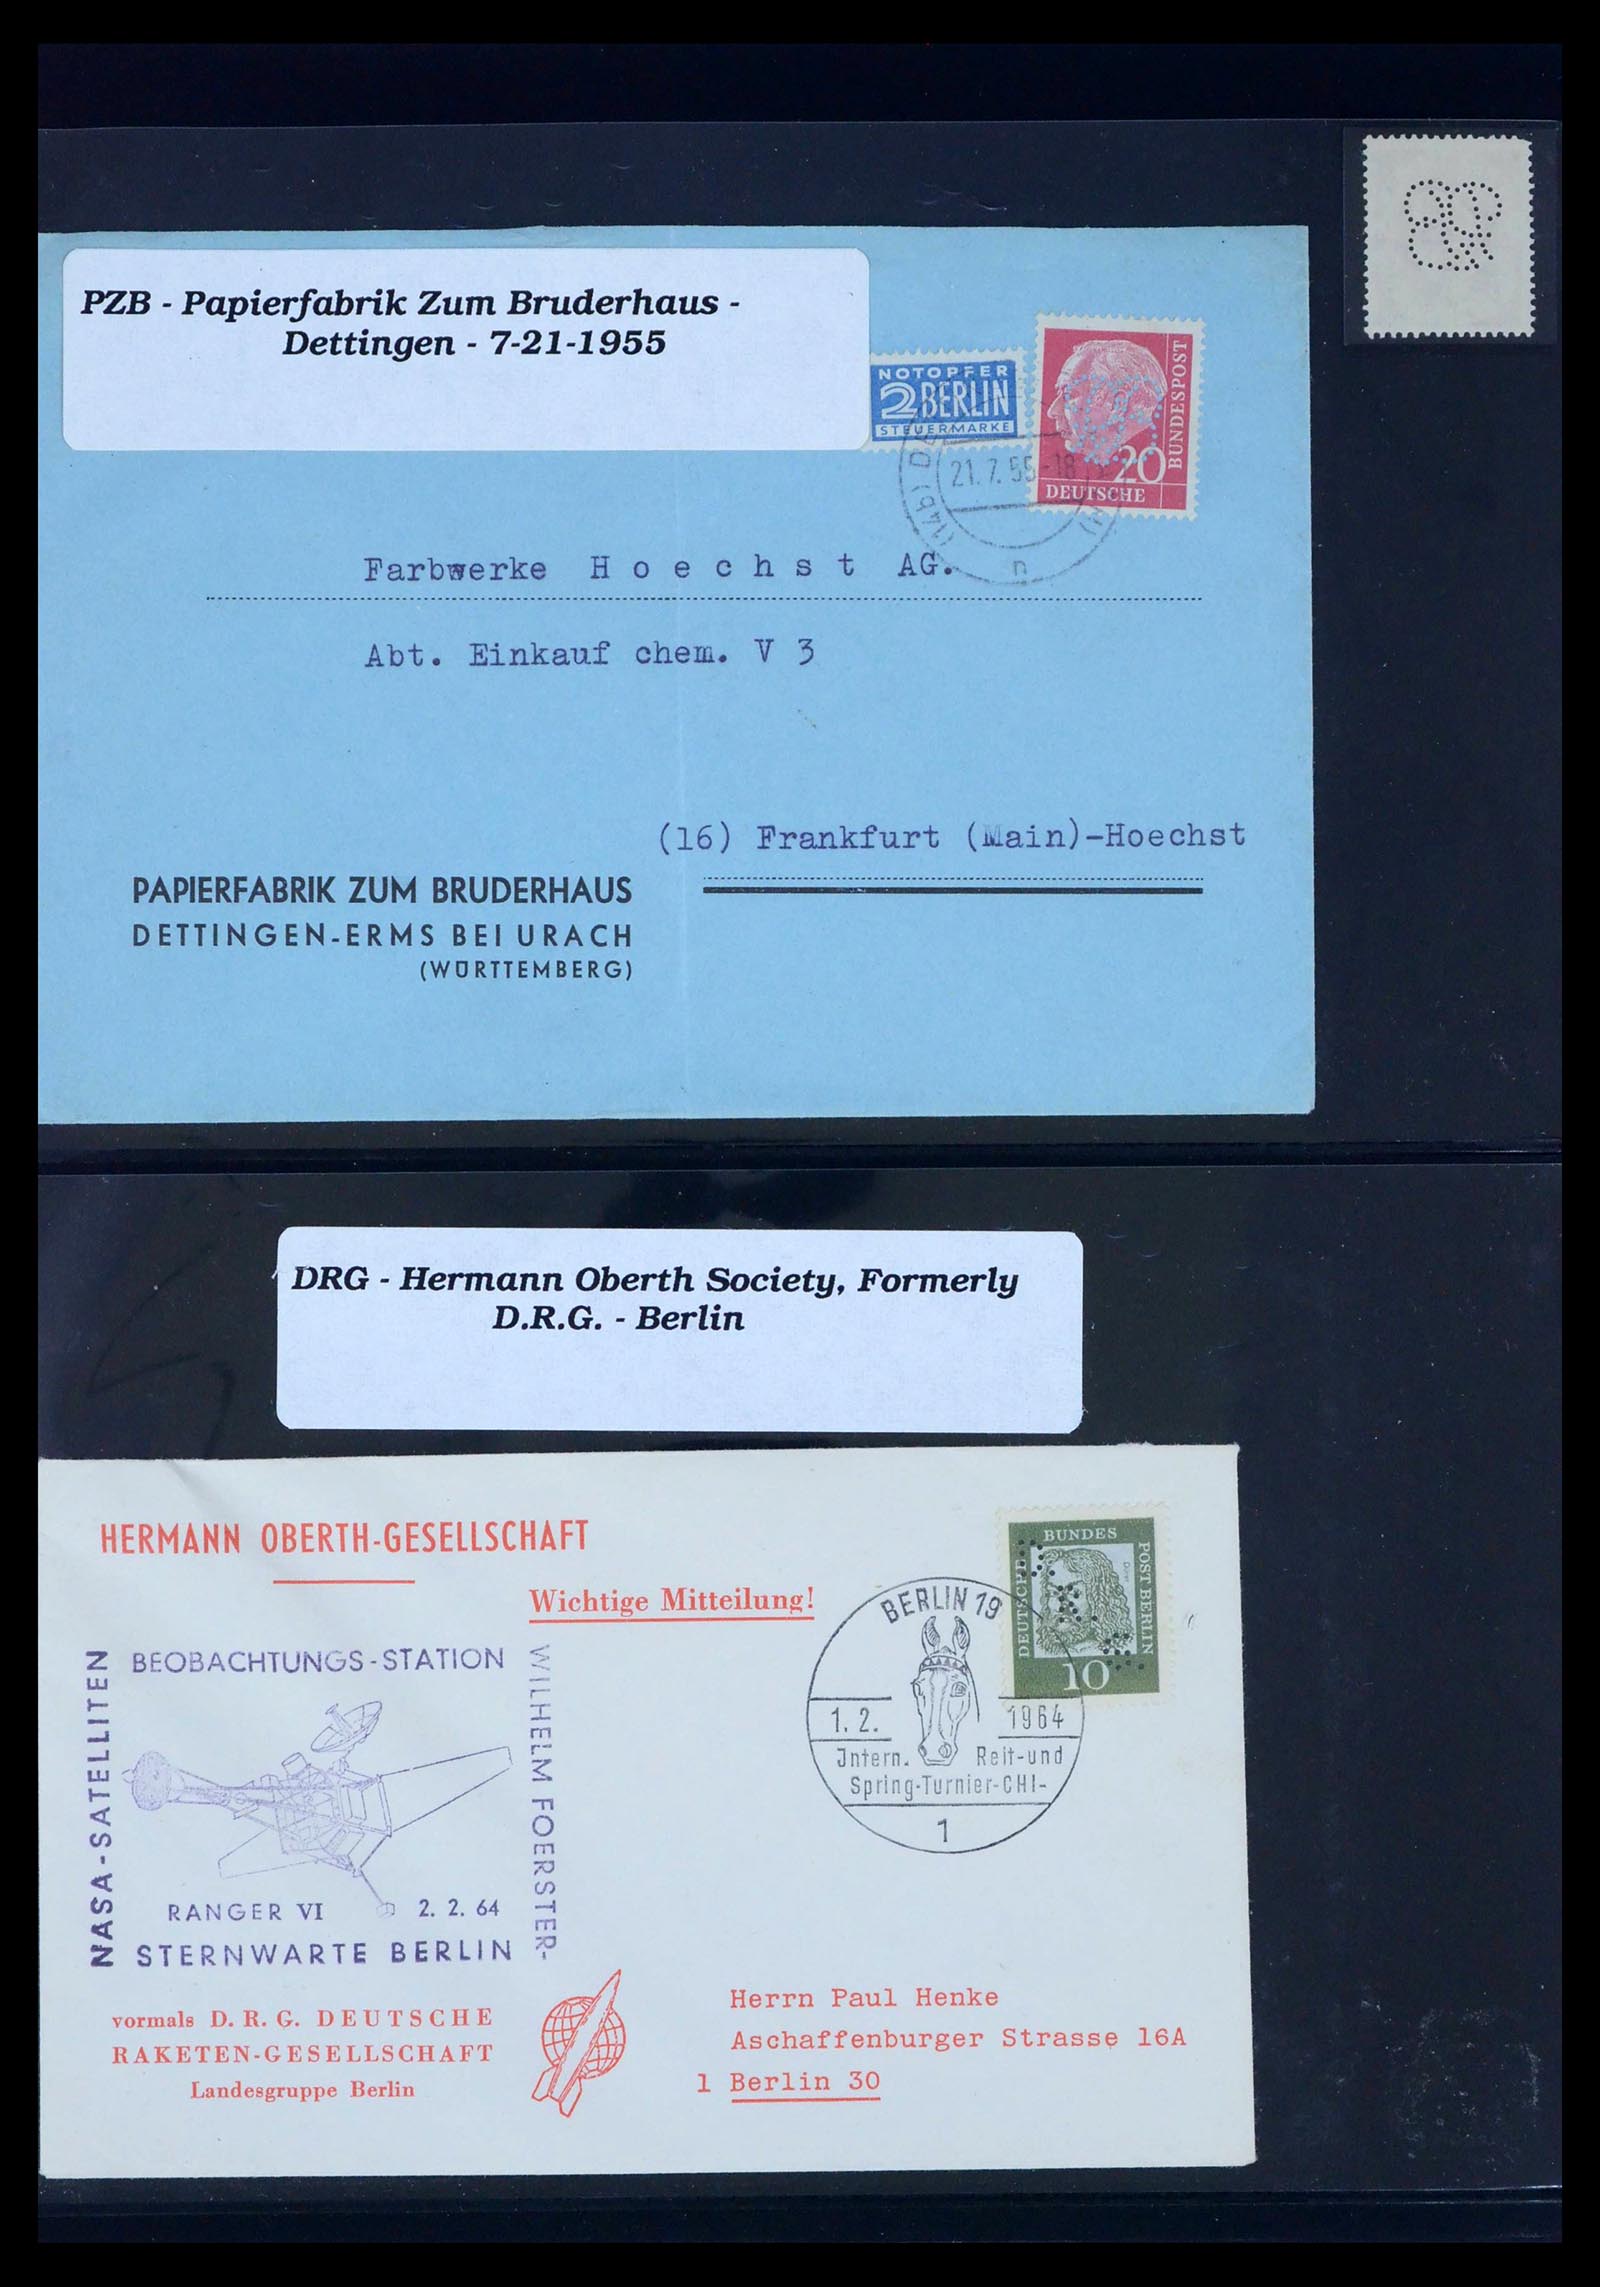 39464 0372 - Stamp collection 39464 German Reich perfins on cover 1886-1943.